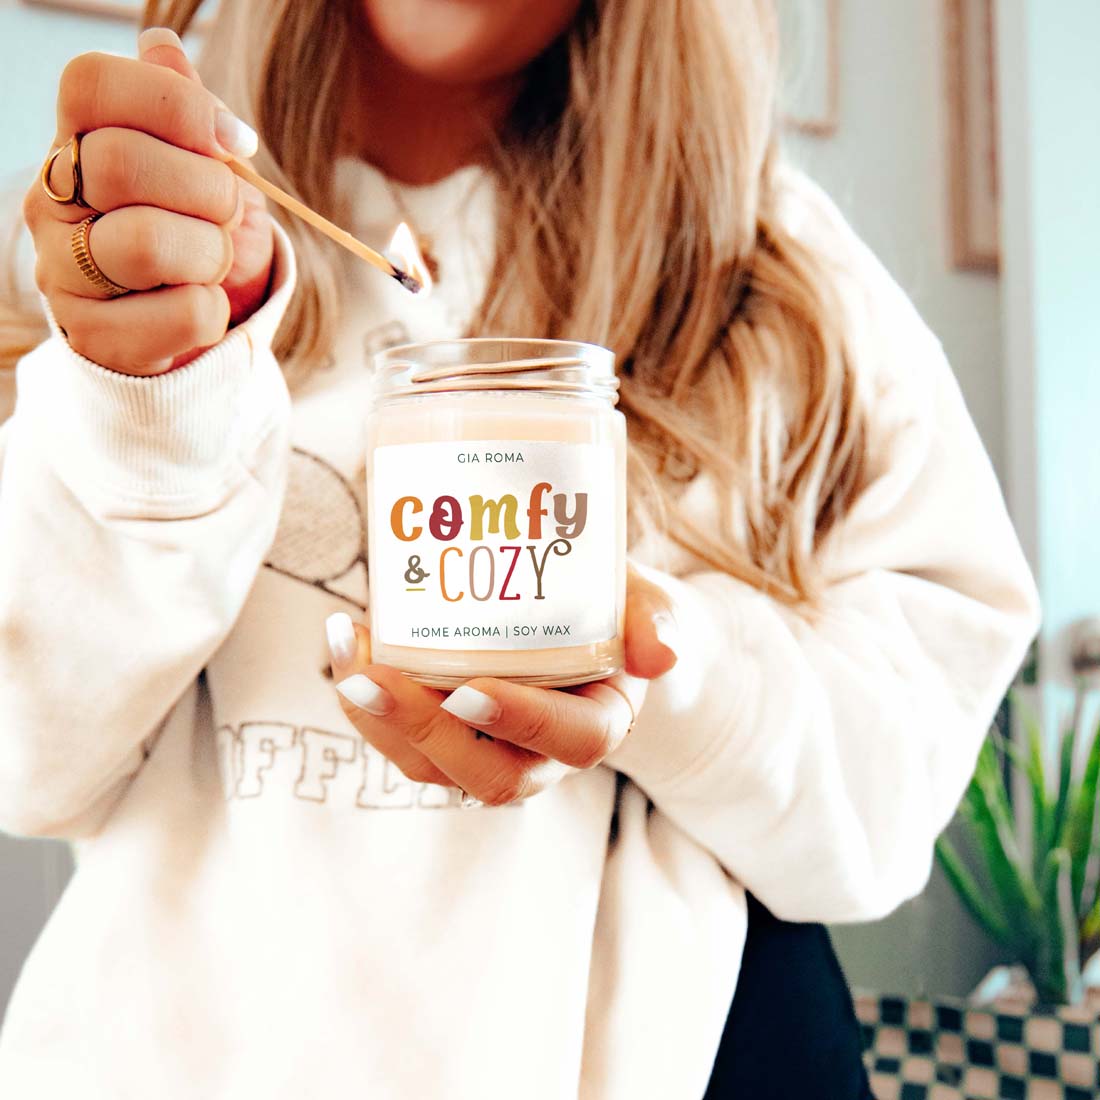 Where to buy fall candles now?